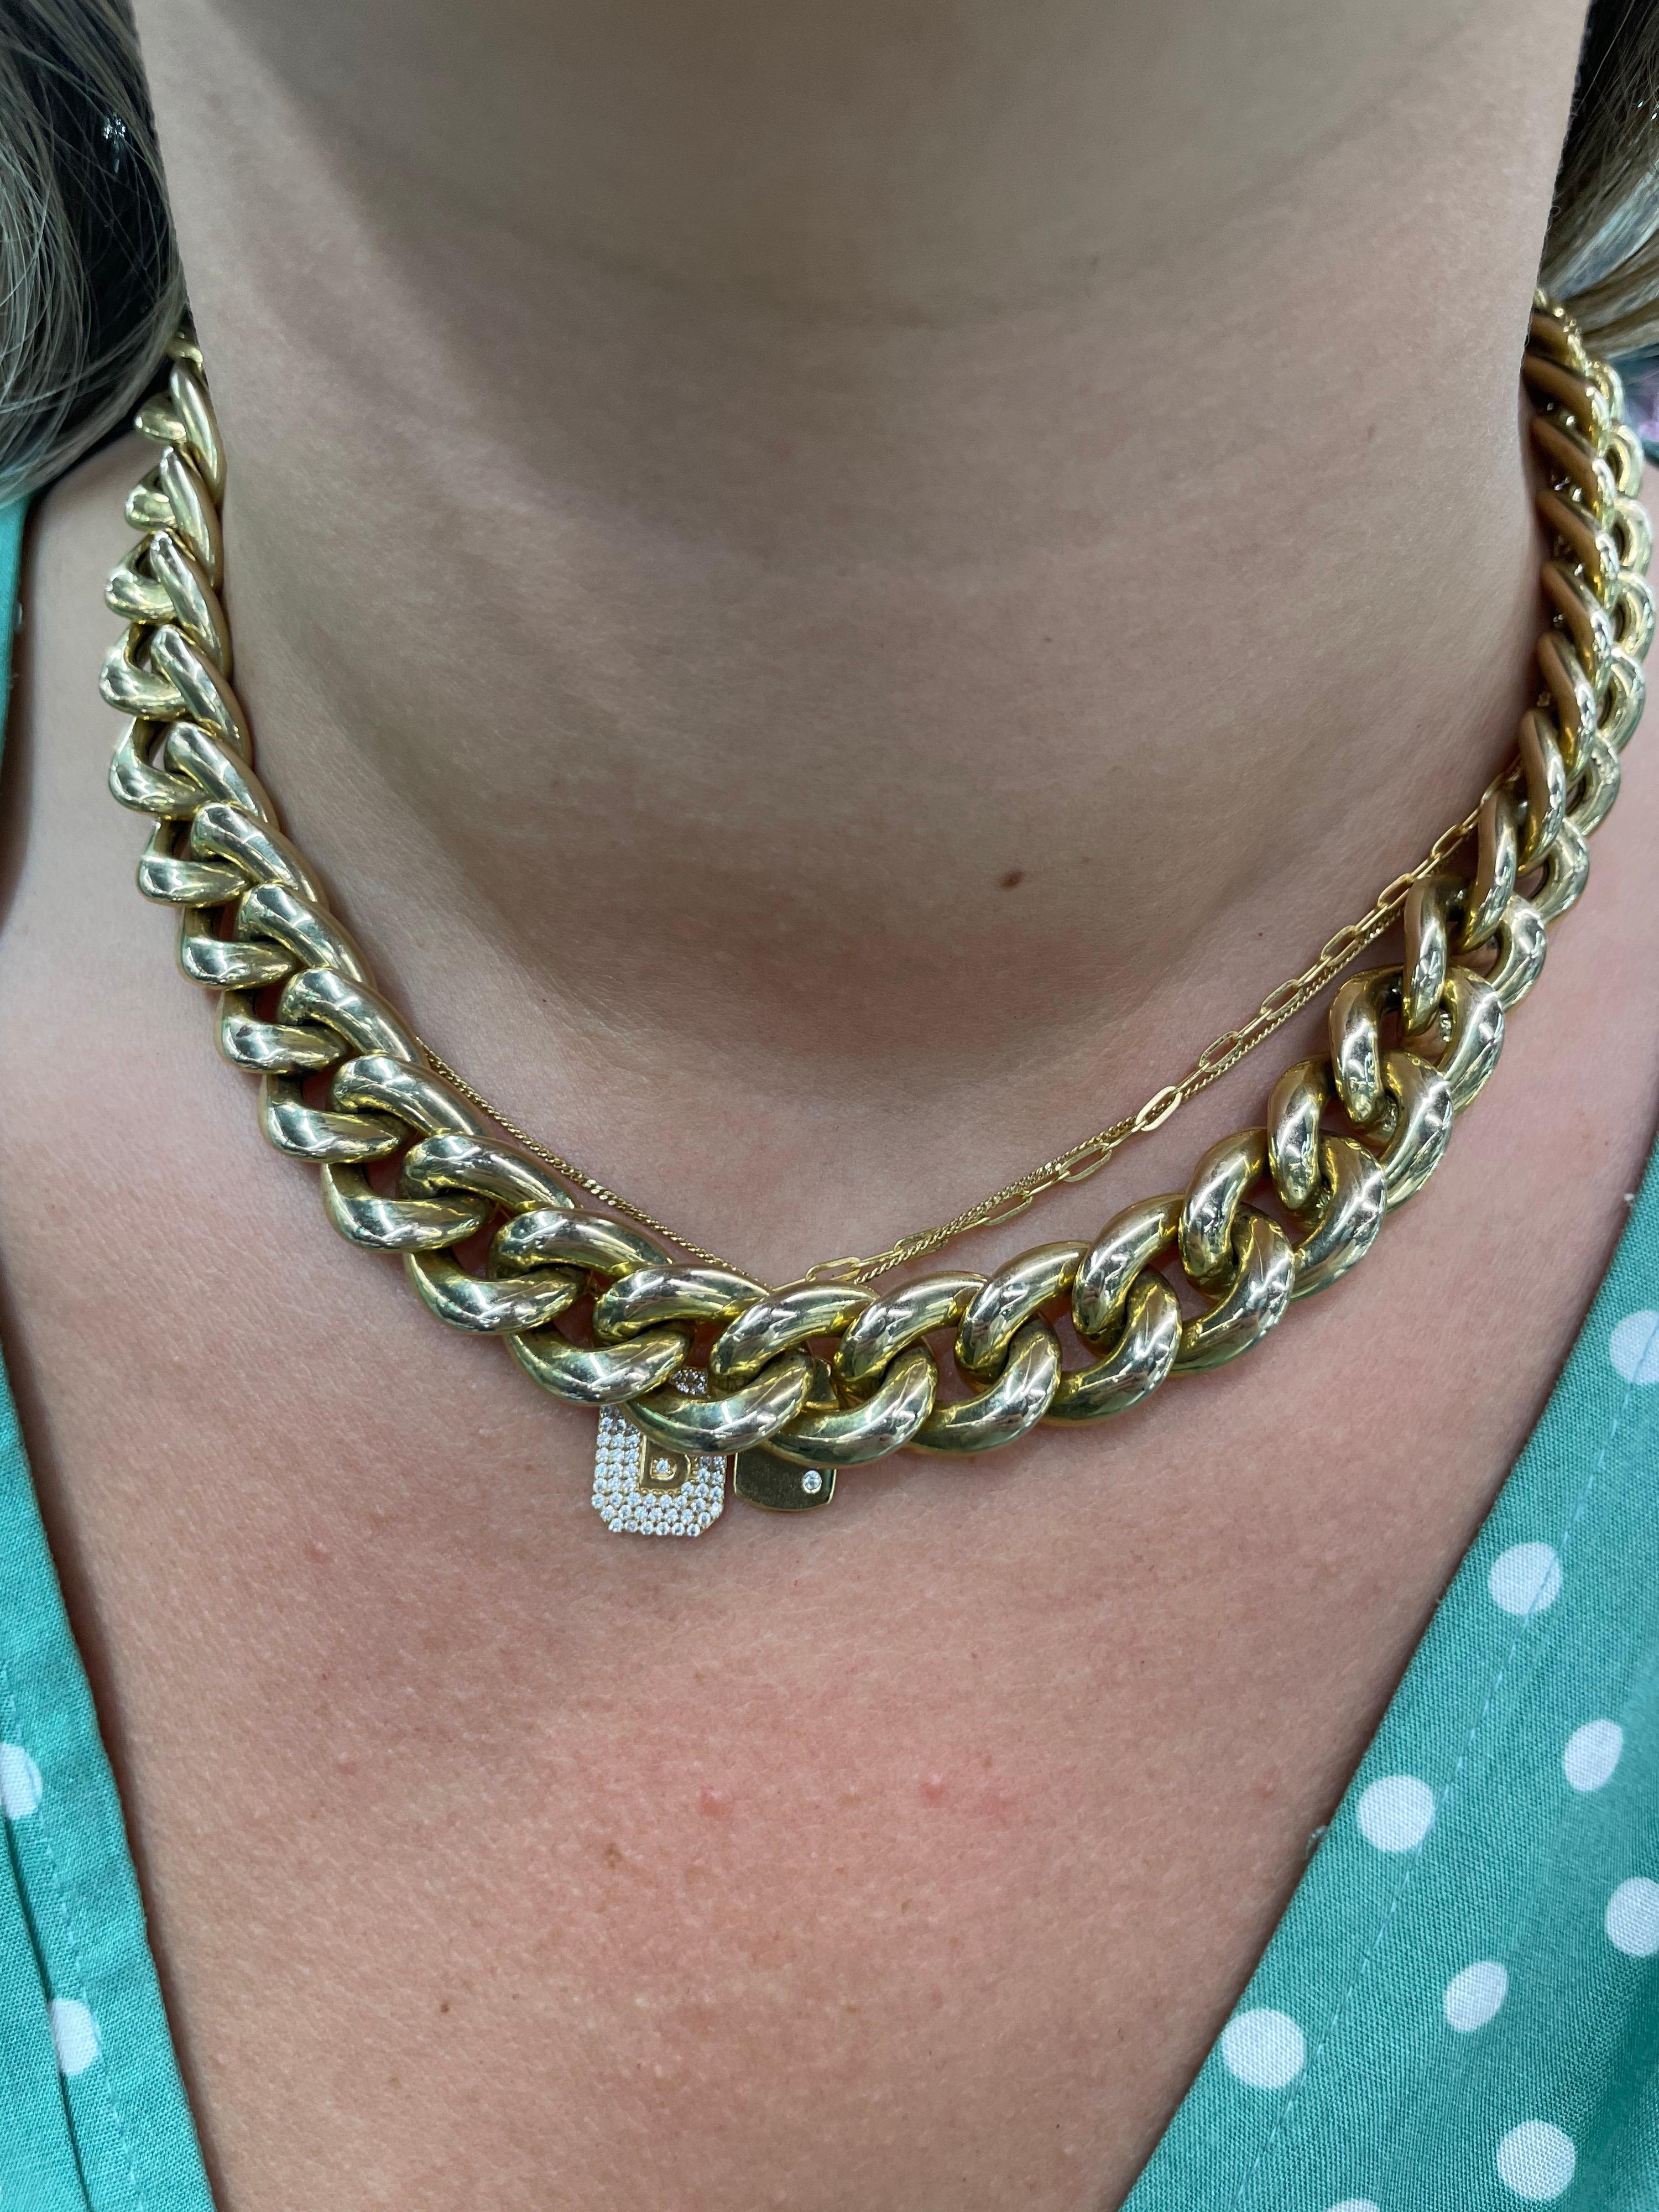 14 Karat Yellow Gold Cuban Link Necklace 47.6 Grams Made in Italy 8 Inches For Sale 4